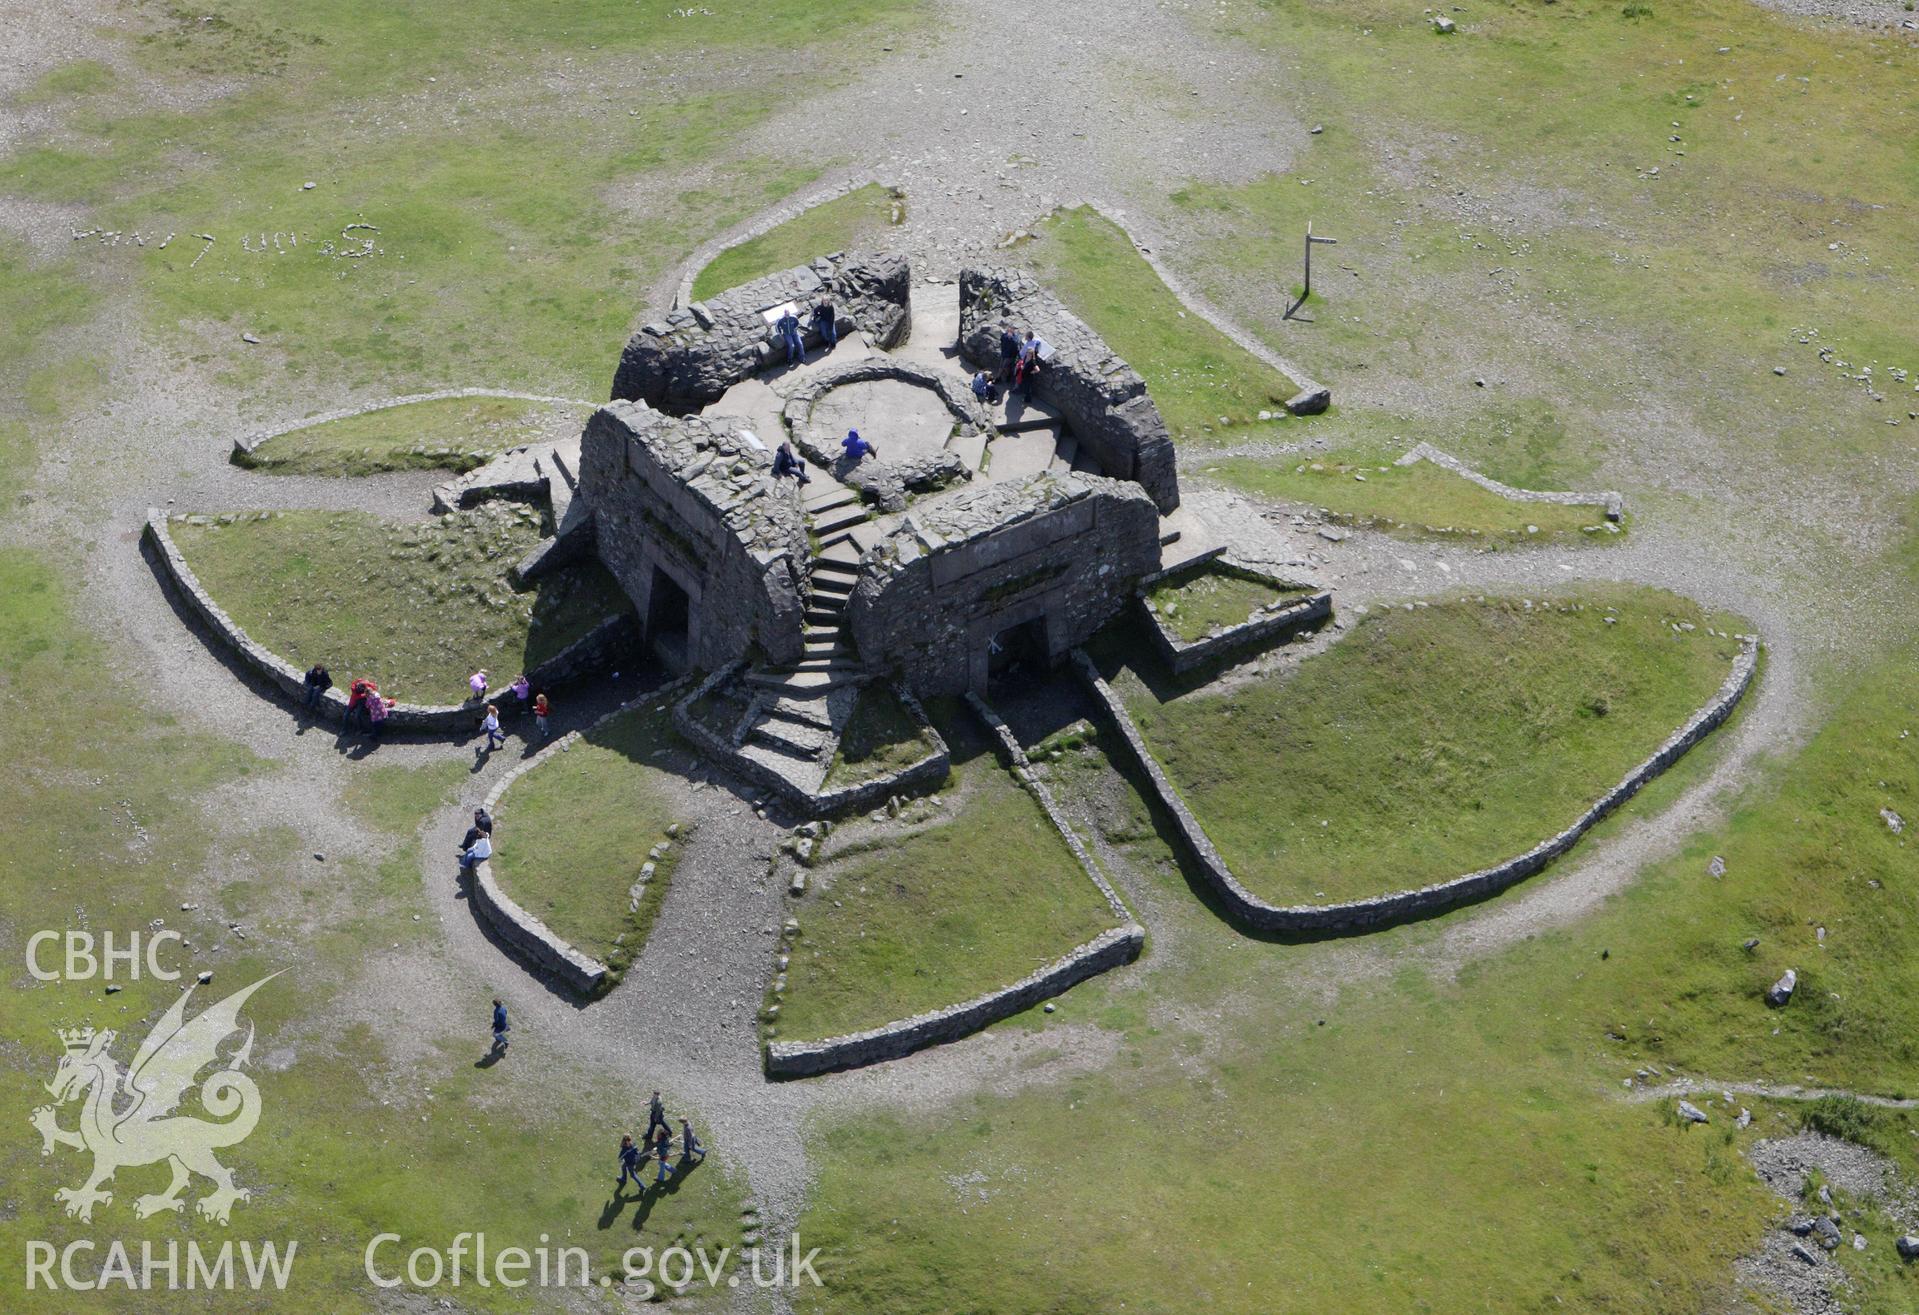 RCAHMW colour oblique aerial photograph of Jubilee Tower, Moel Famau, Llangynhafal. Taken on 30 July 2009 by Toby Driver